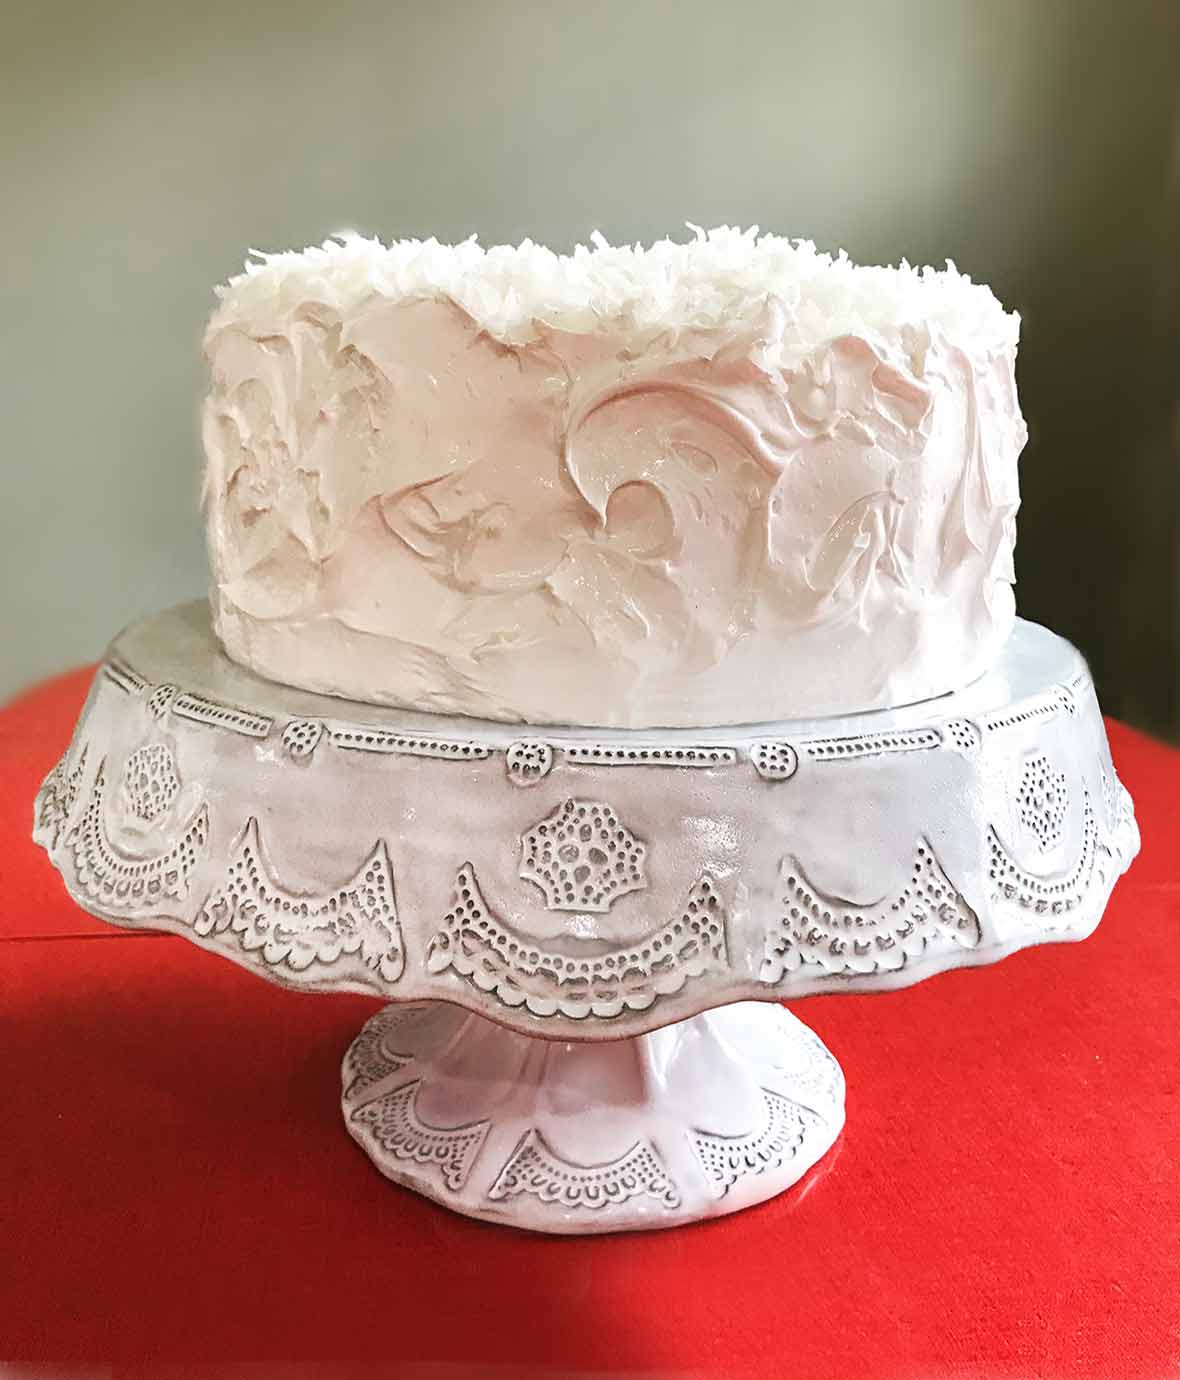 Coconut layer cake with white meringue frosting topped with shredded coconut on a white cake stand on a red table